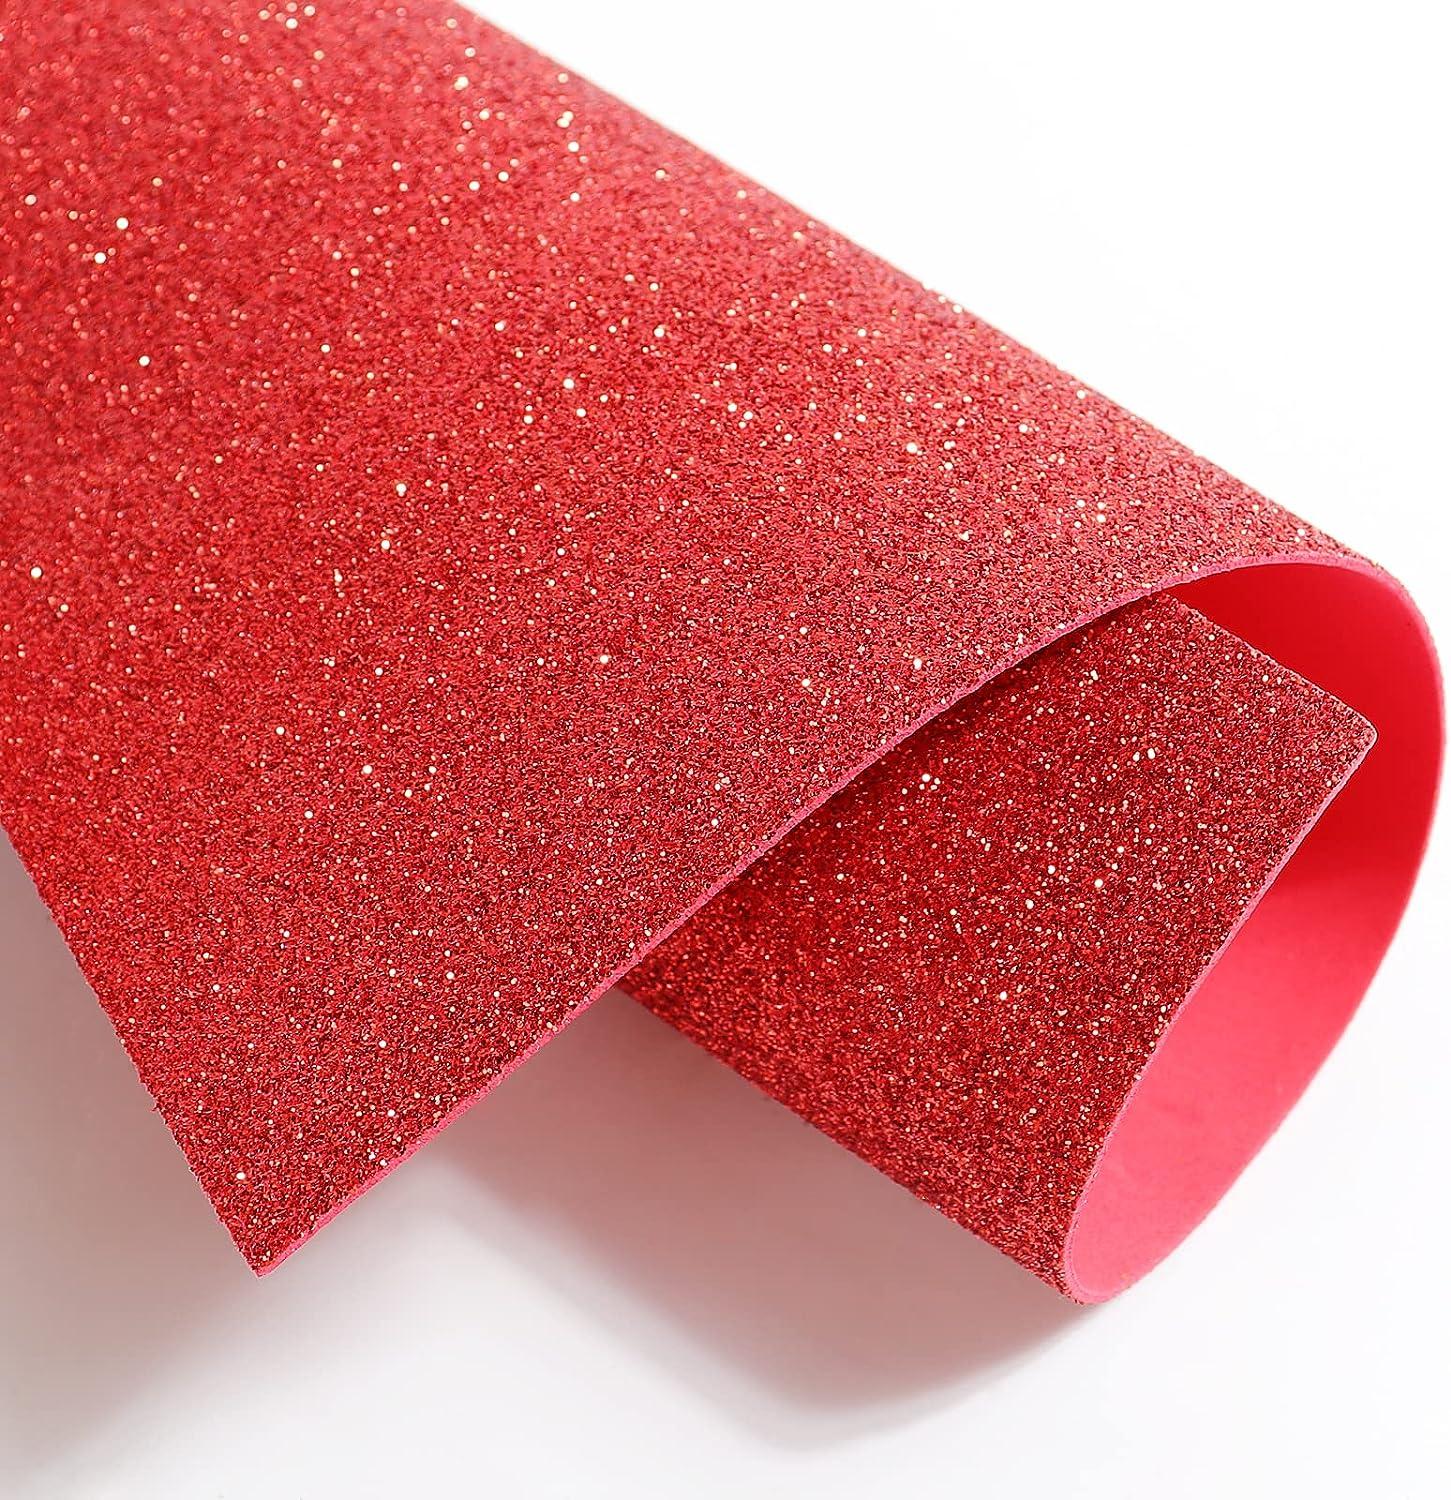 20 Sheets Glitter Foam Cardstock Paper Sparkles Self Adhesive